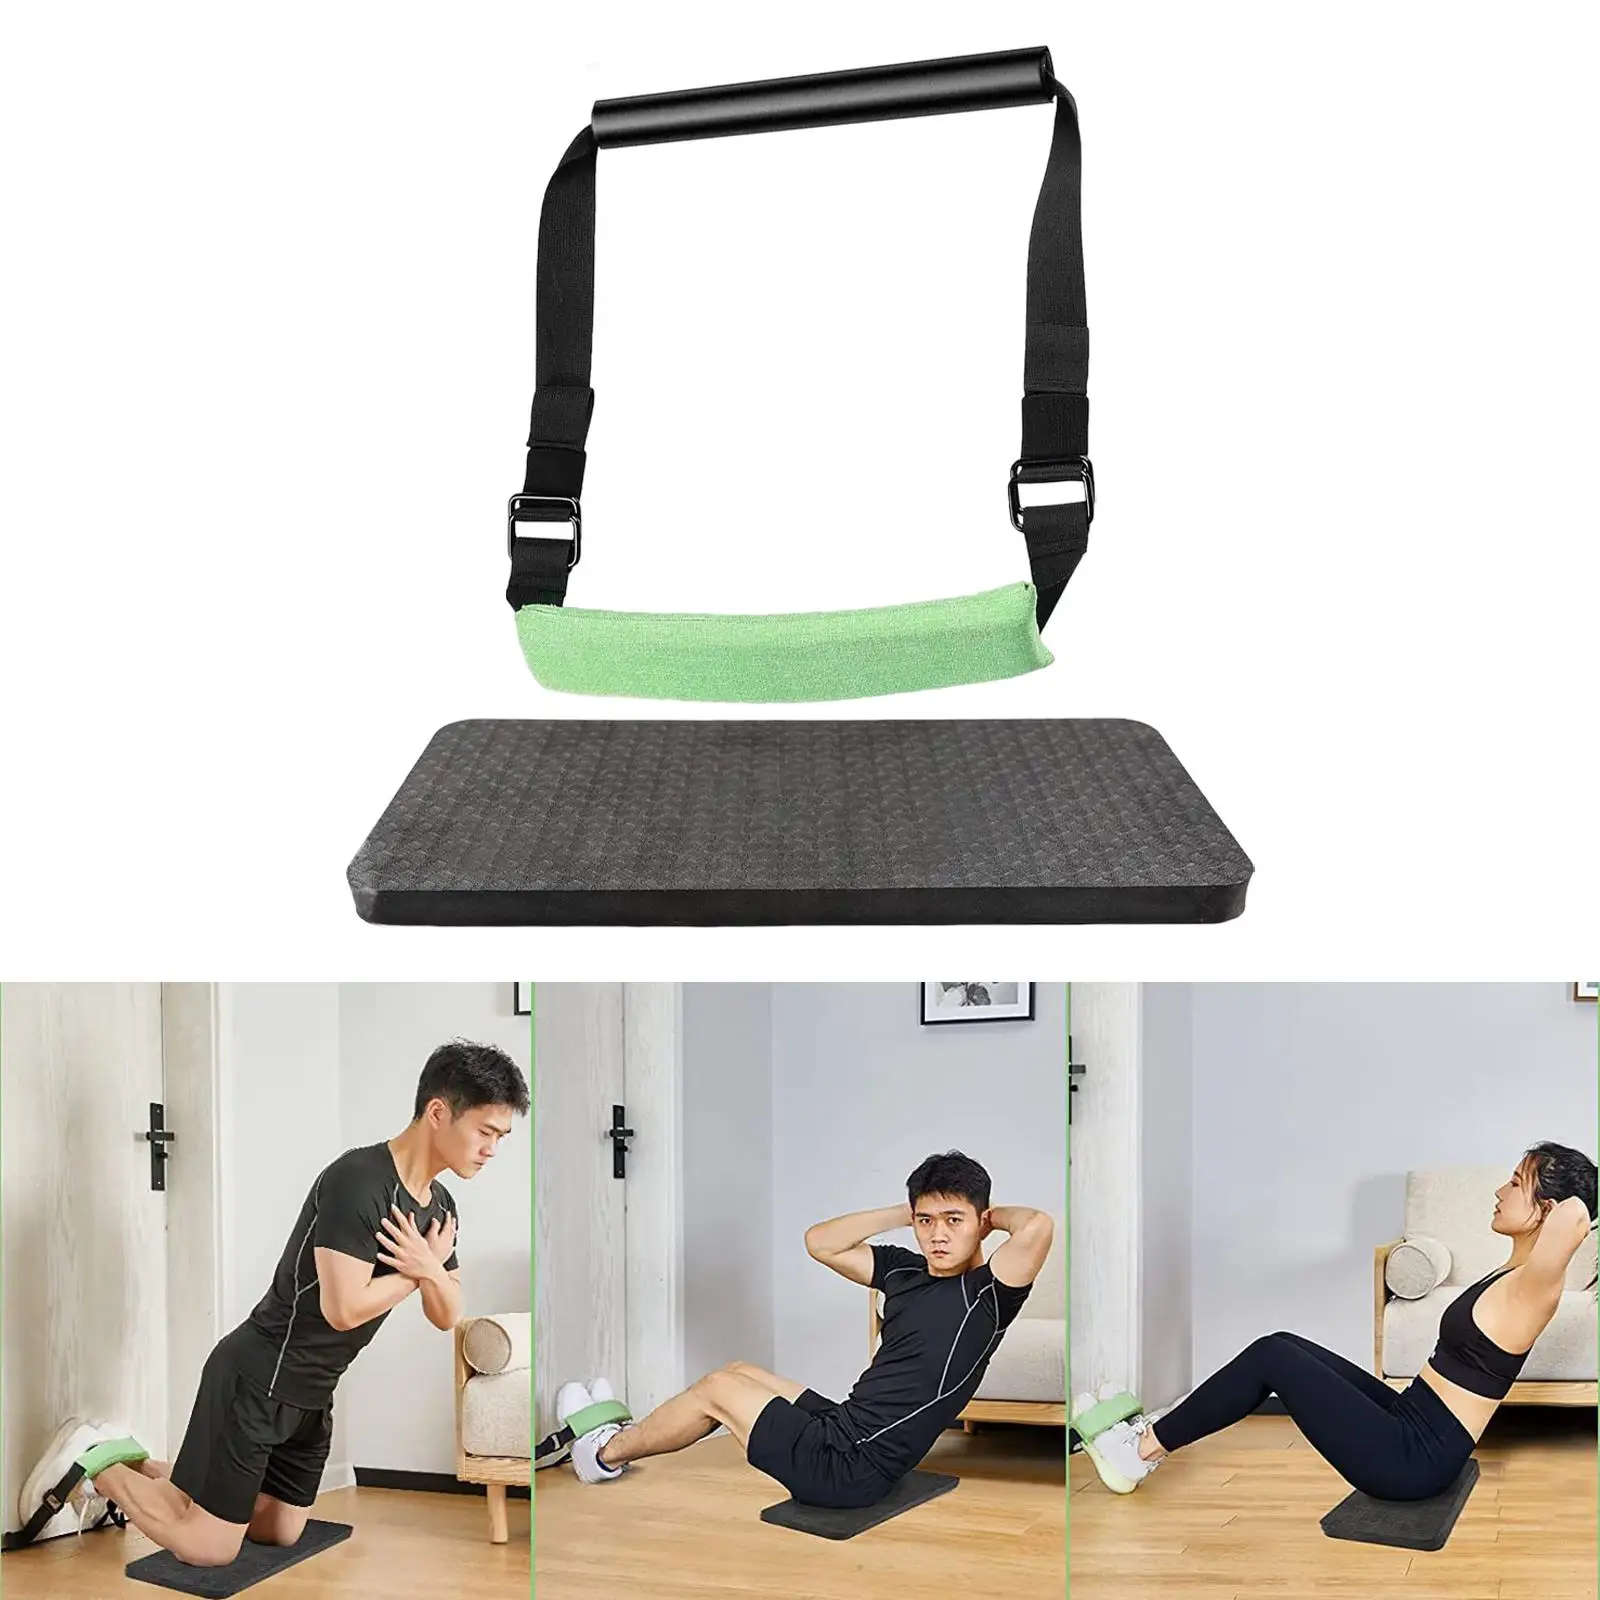 Hamstring Curl Strap Curl Ab Leg Exercise Crunches Adjustable Sit Up Assistant Bar for Home Workout Unisex Gym Fitness